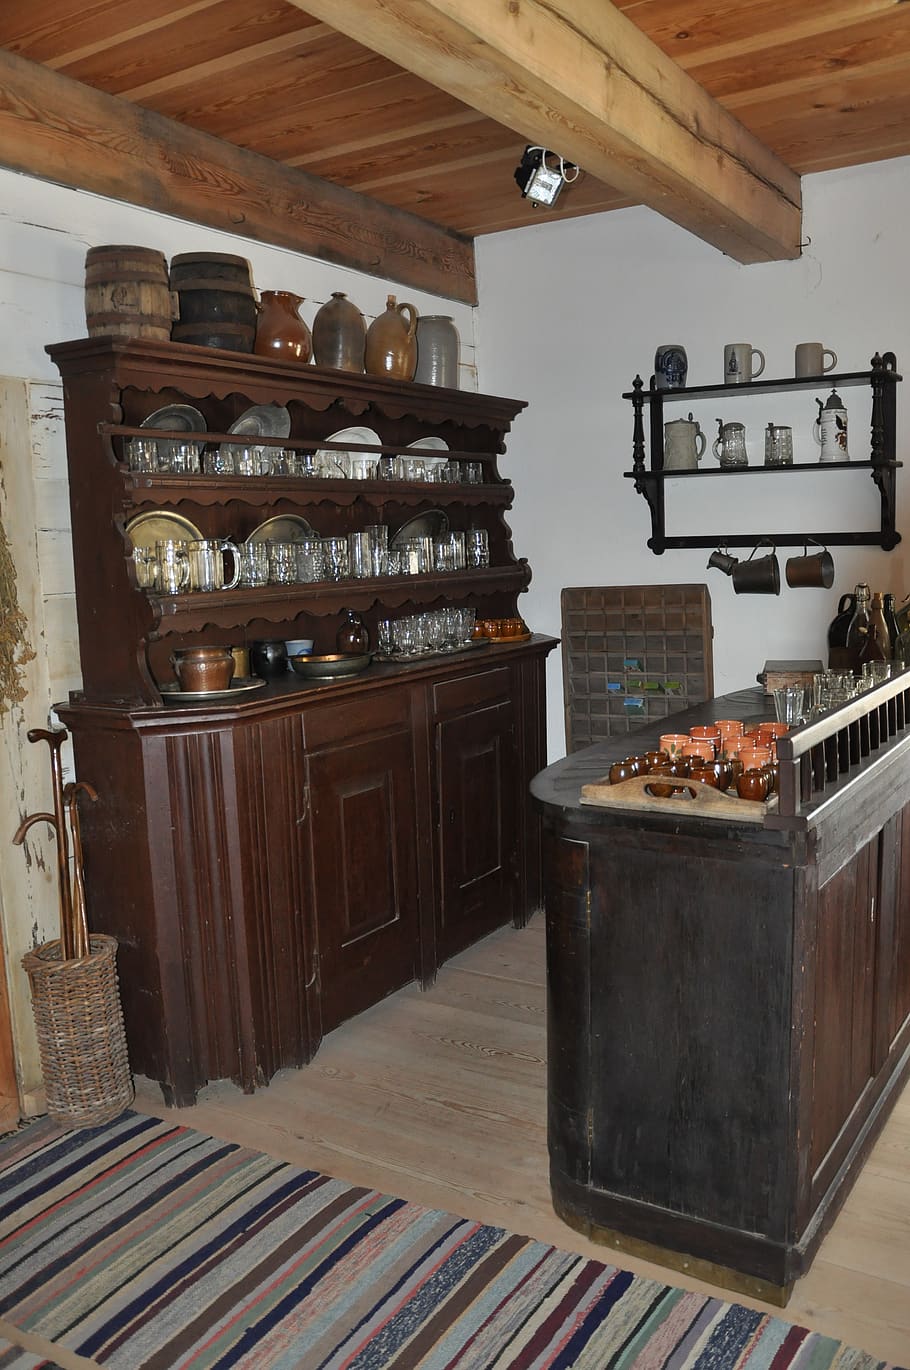 dresser, kitchen utensils, antiques, the museum, cottage, chamber, room, furniture, wood, open air museum